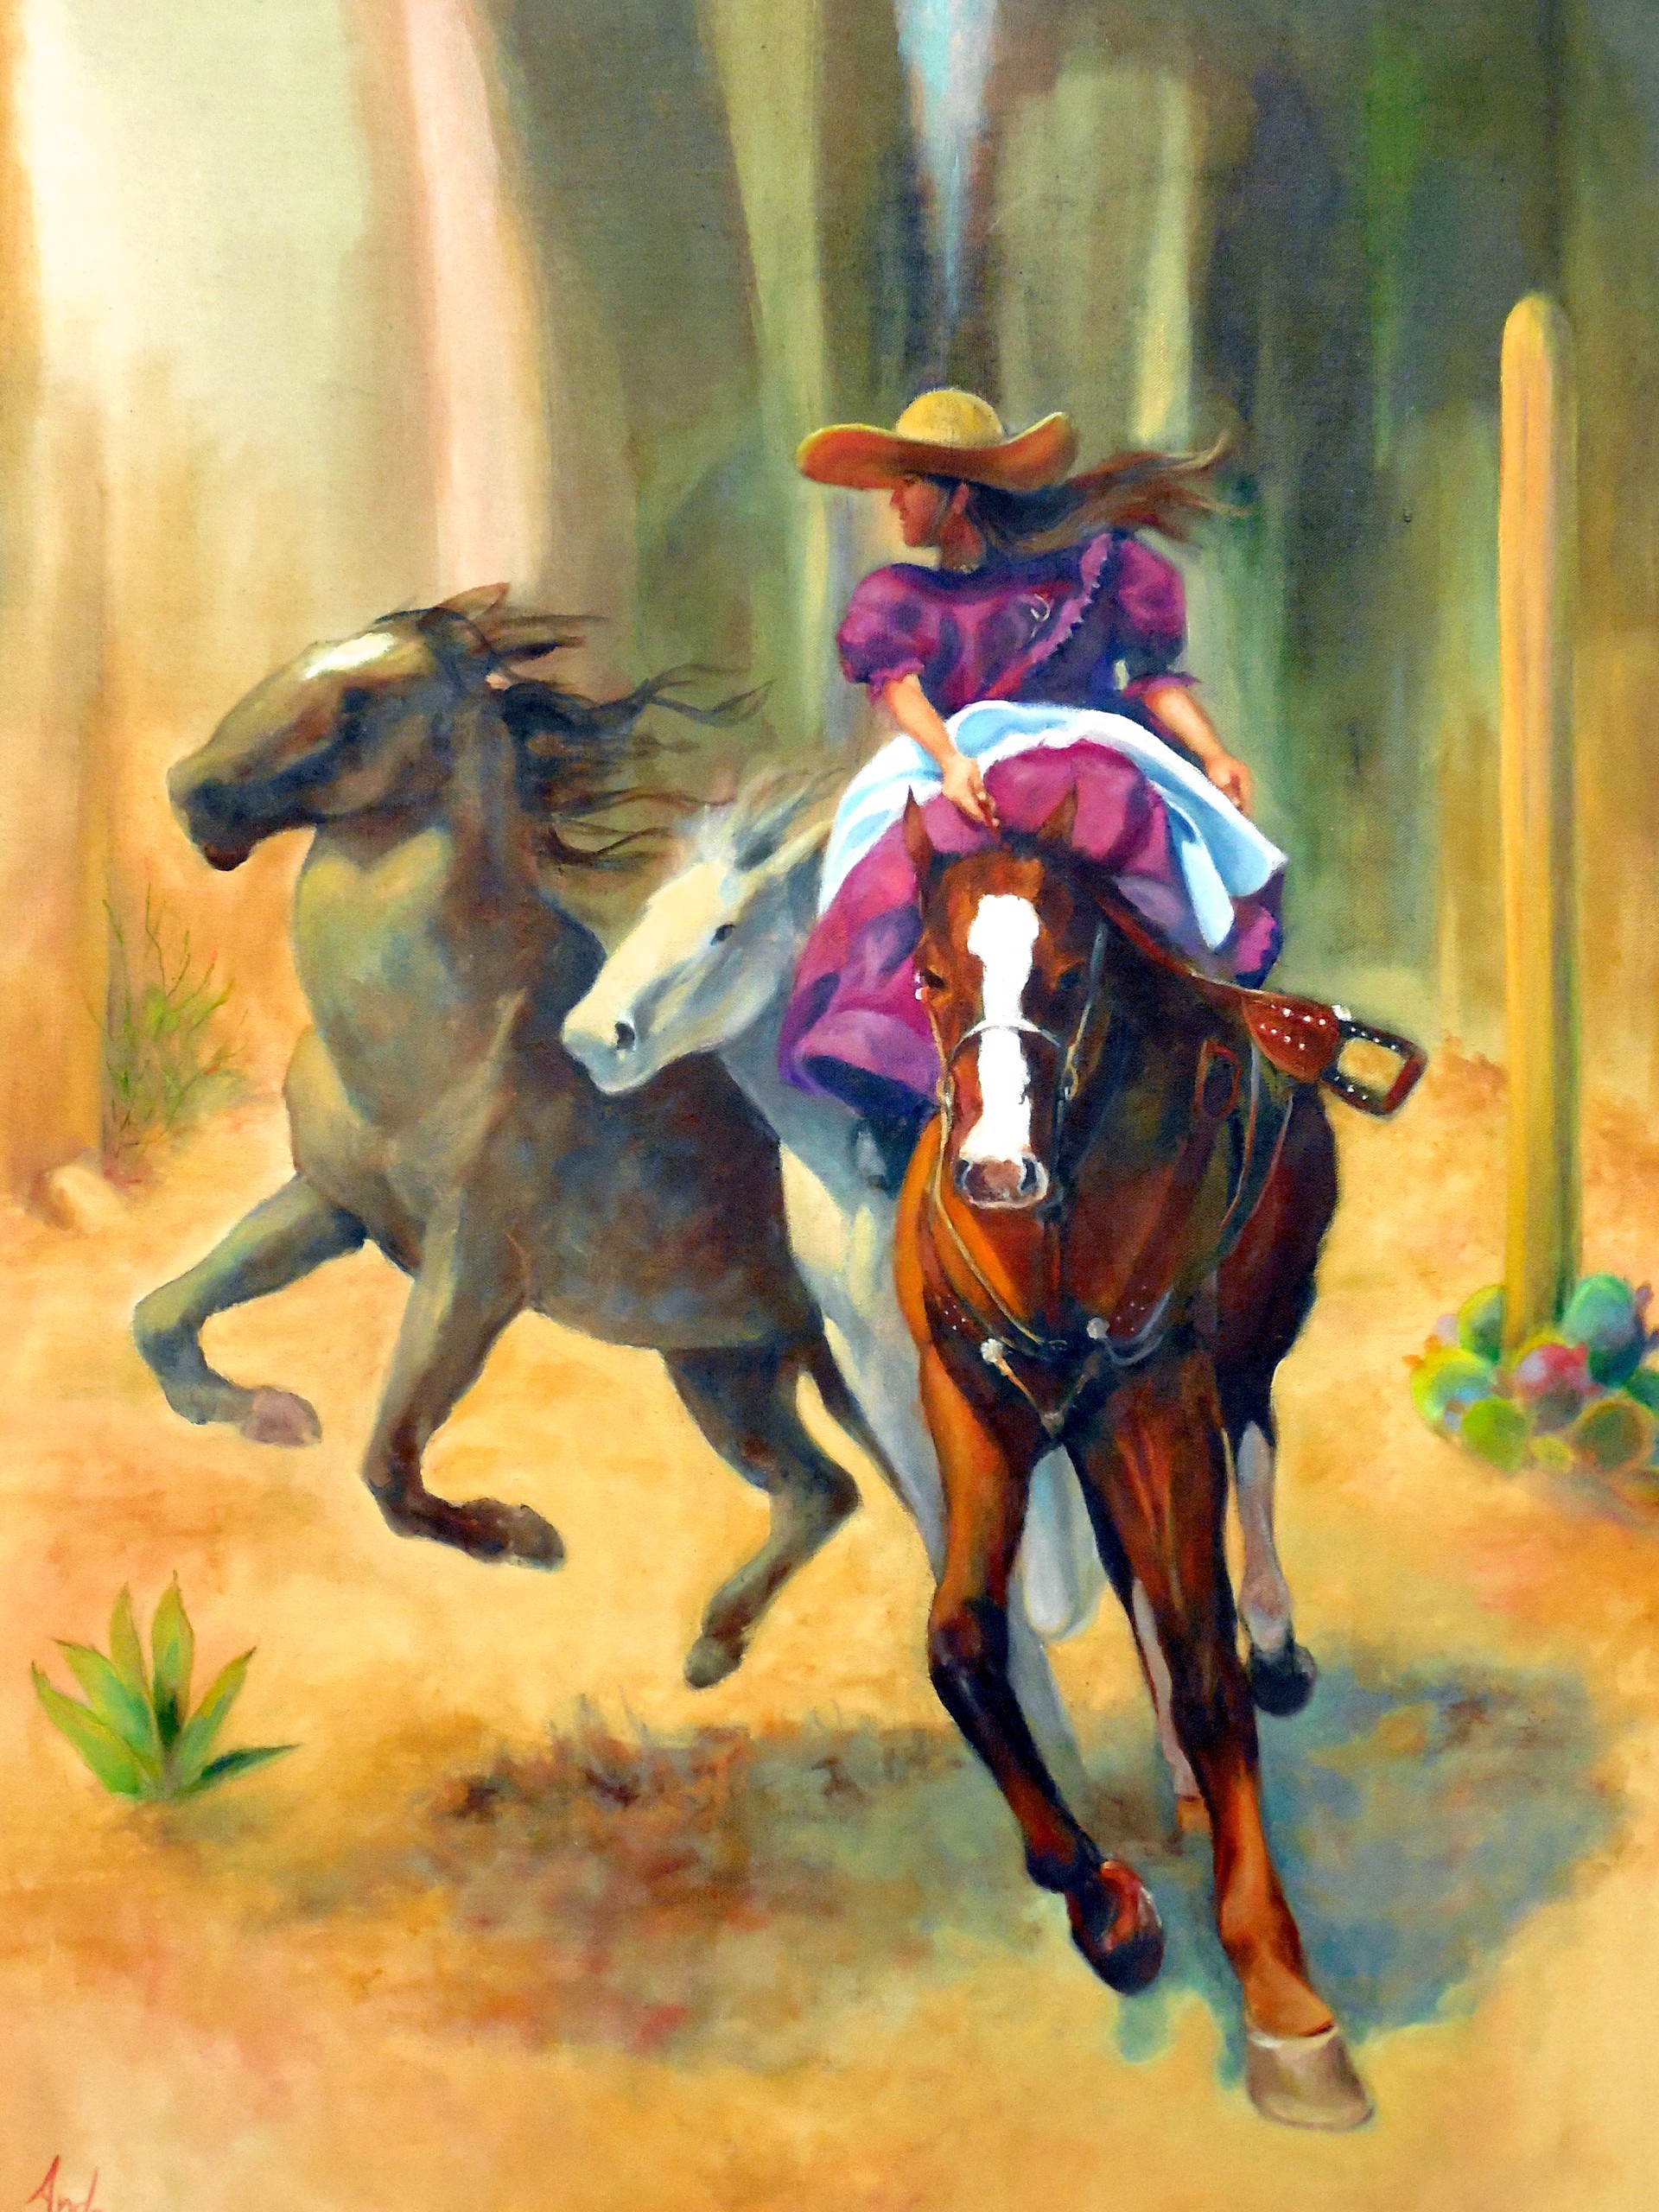 51 Into the Canyon by Jacqueline Andes